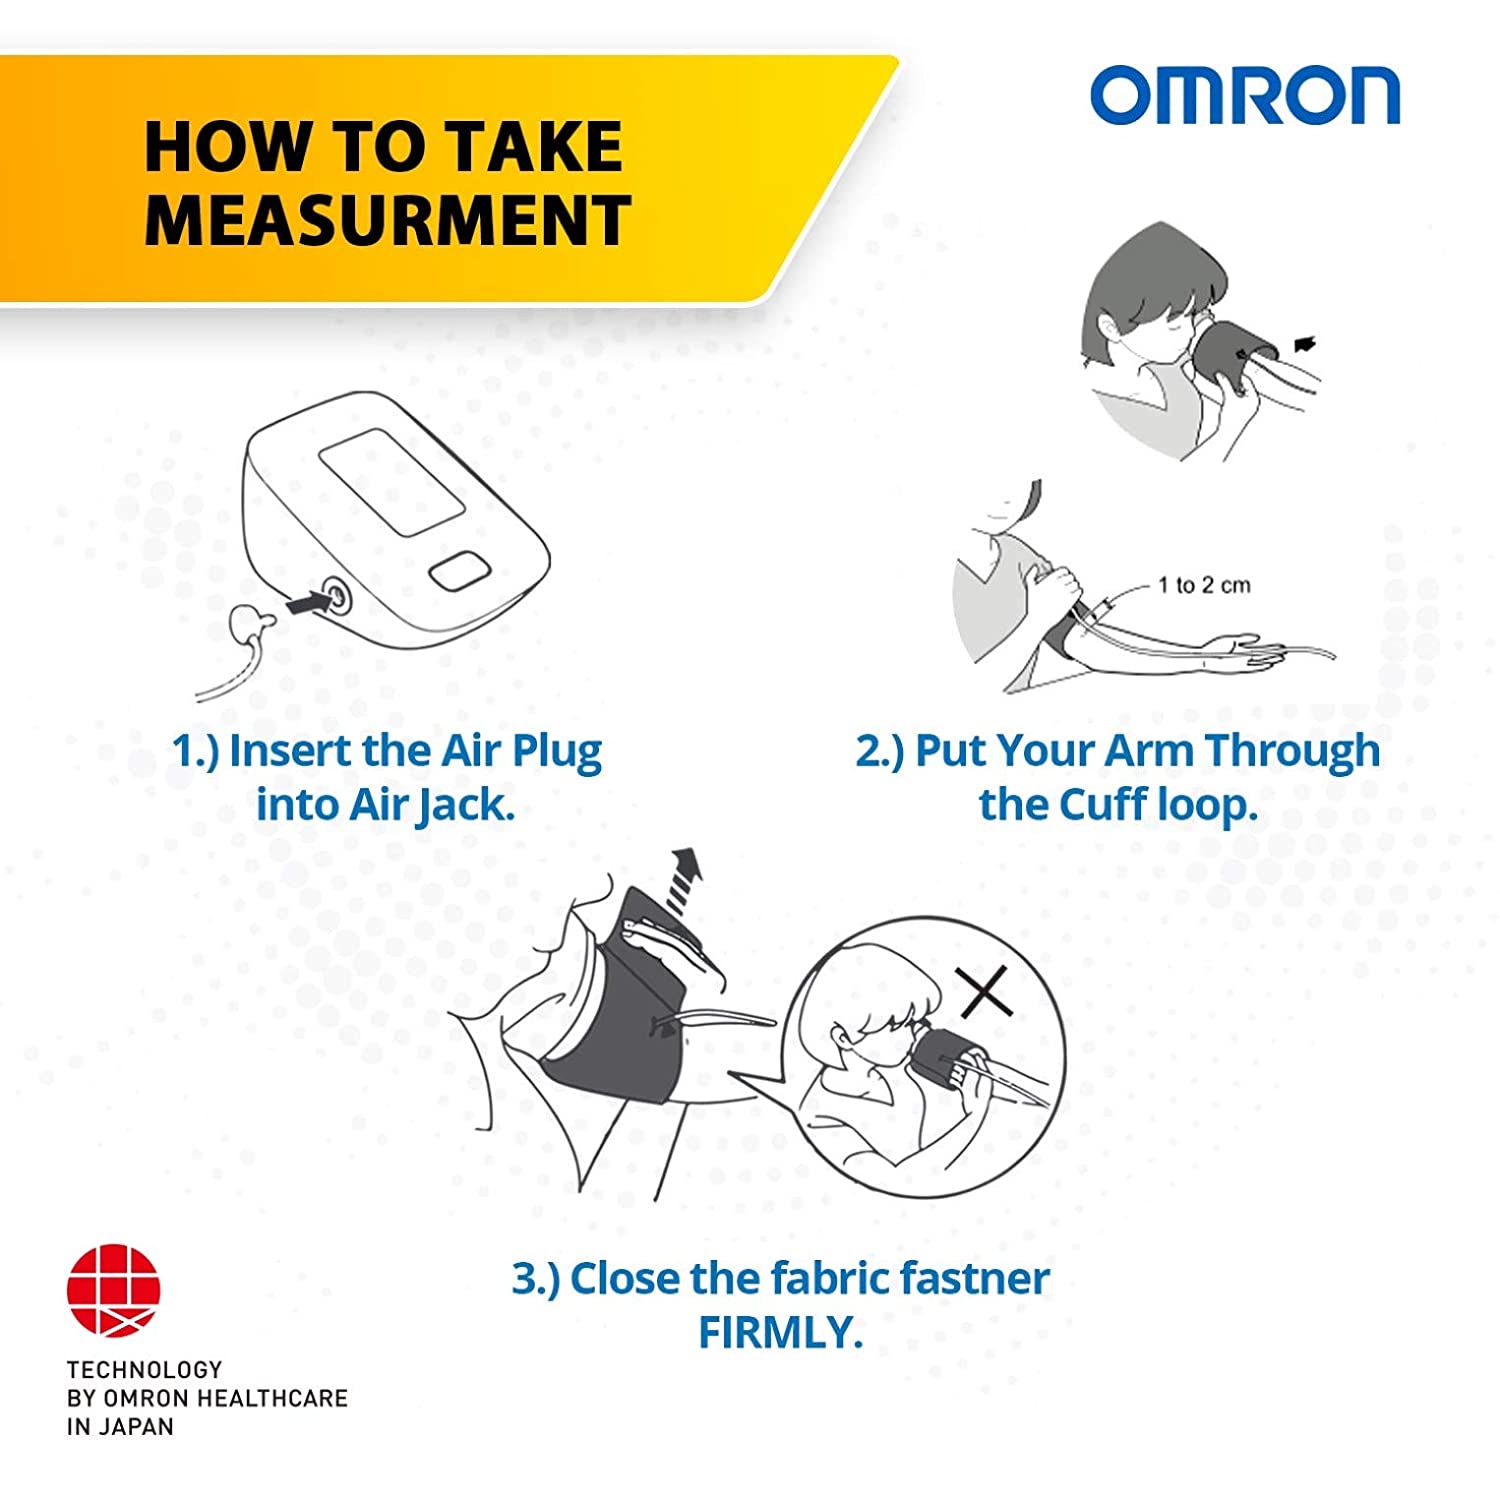 Omron Hem 7124 Fully Automatic Digital Blood Pressure Monitor with  Intellisense Technology Most Accurate Measurement